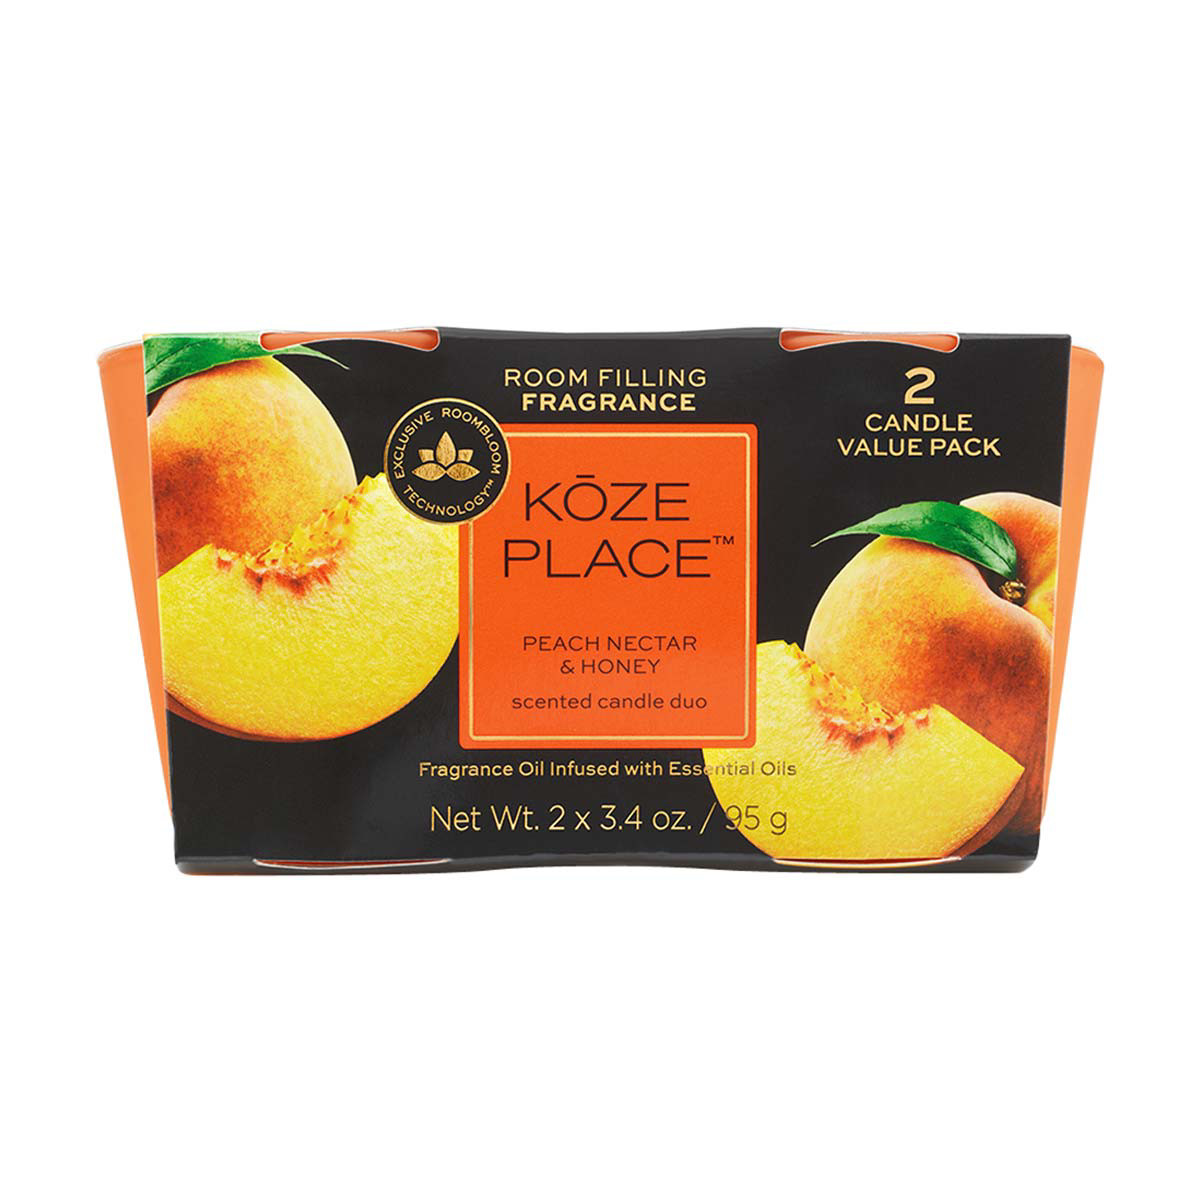 Koze Place Peach Nectar and Honey Scented Candle Duo, 3.4 oz